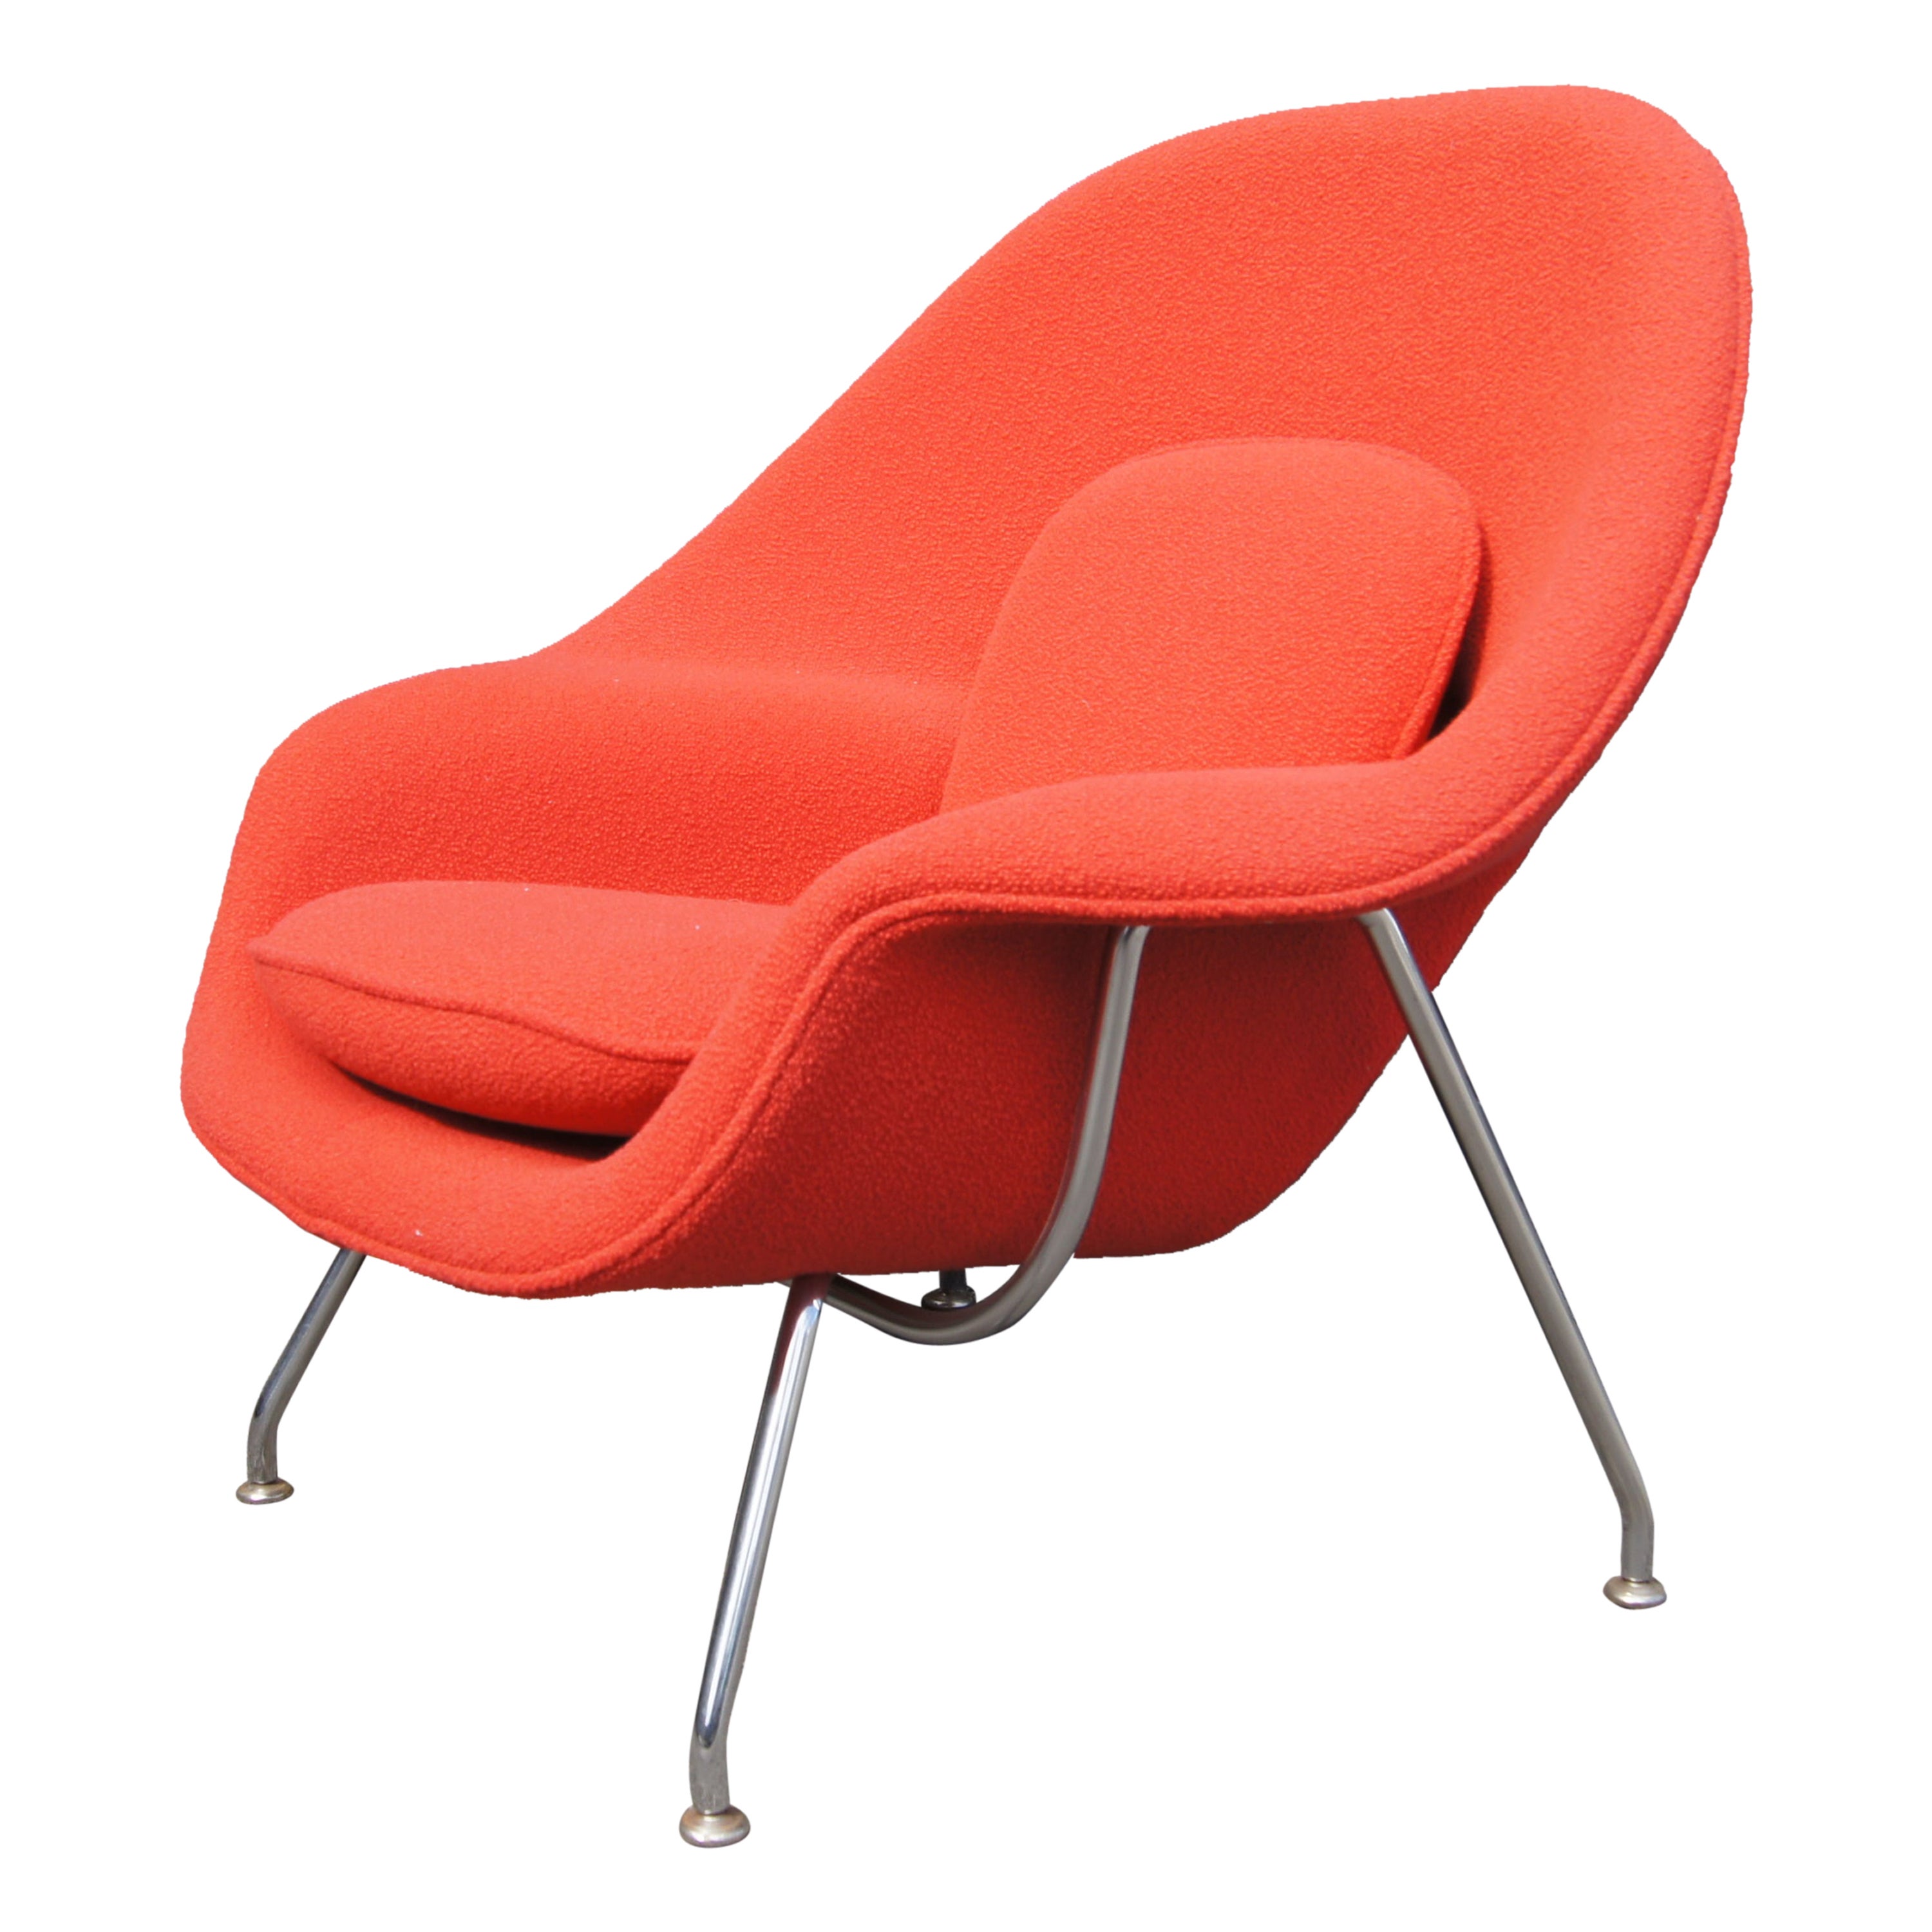 Child's Womb Chair by Eero Saarinen for Knoll